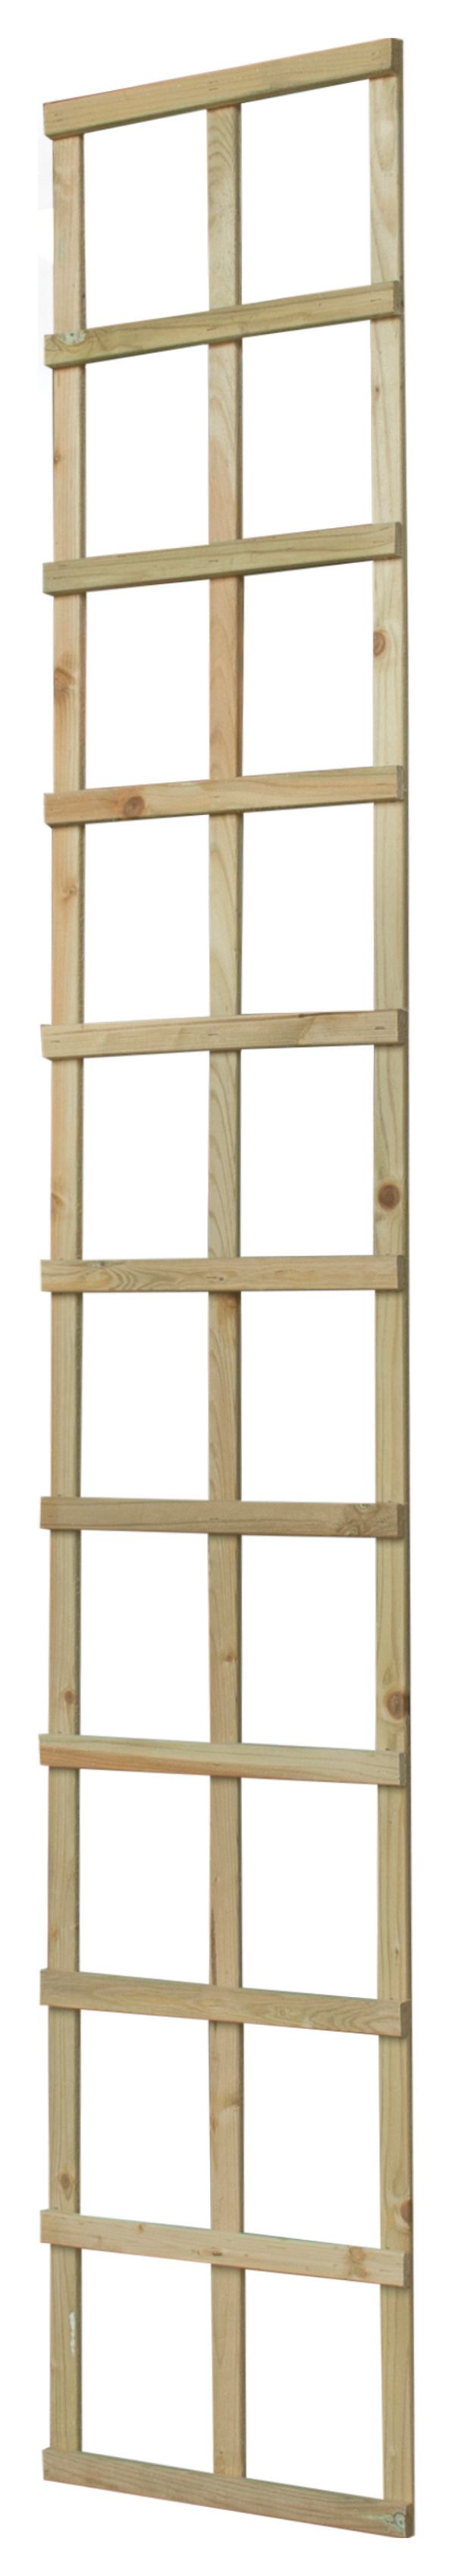 Image of Forest Garden Smooth Planed Trellis Panel - 300 x 1800mm